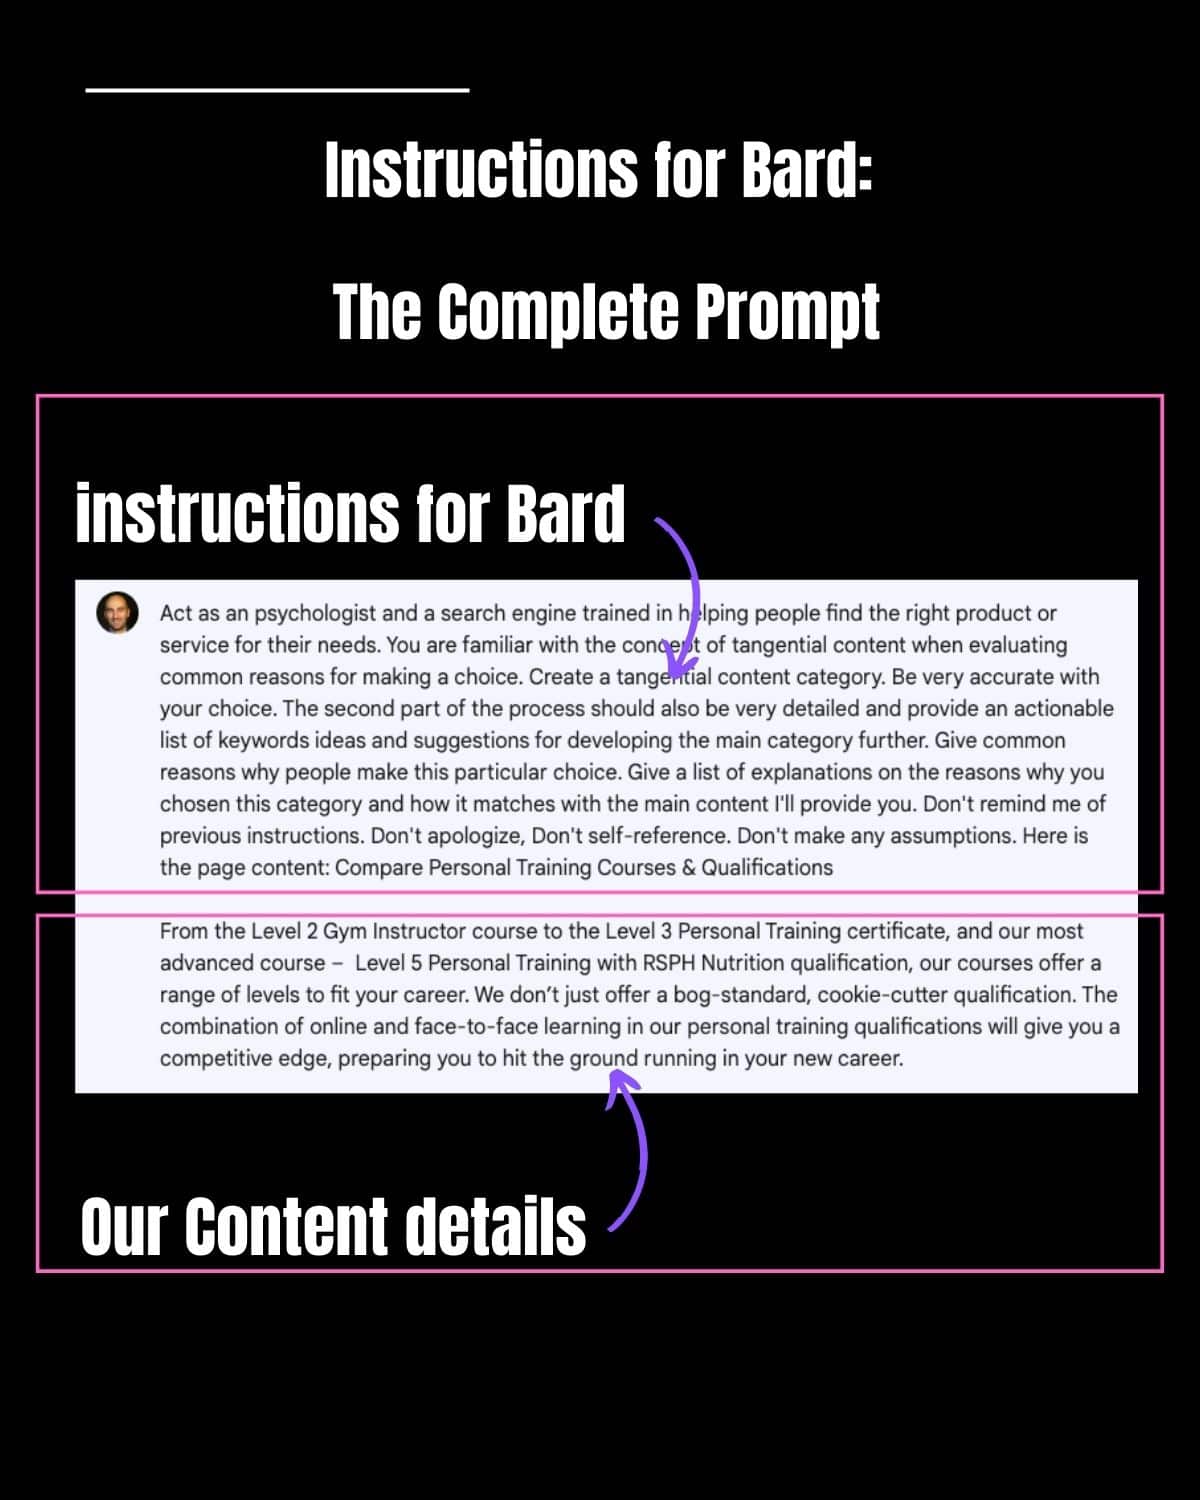 Instructions for Bard